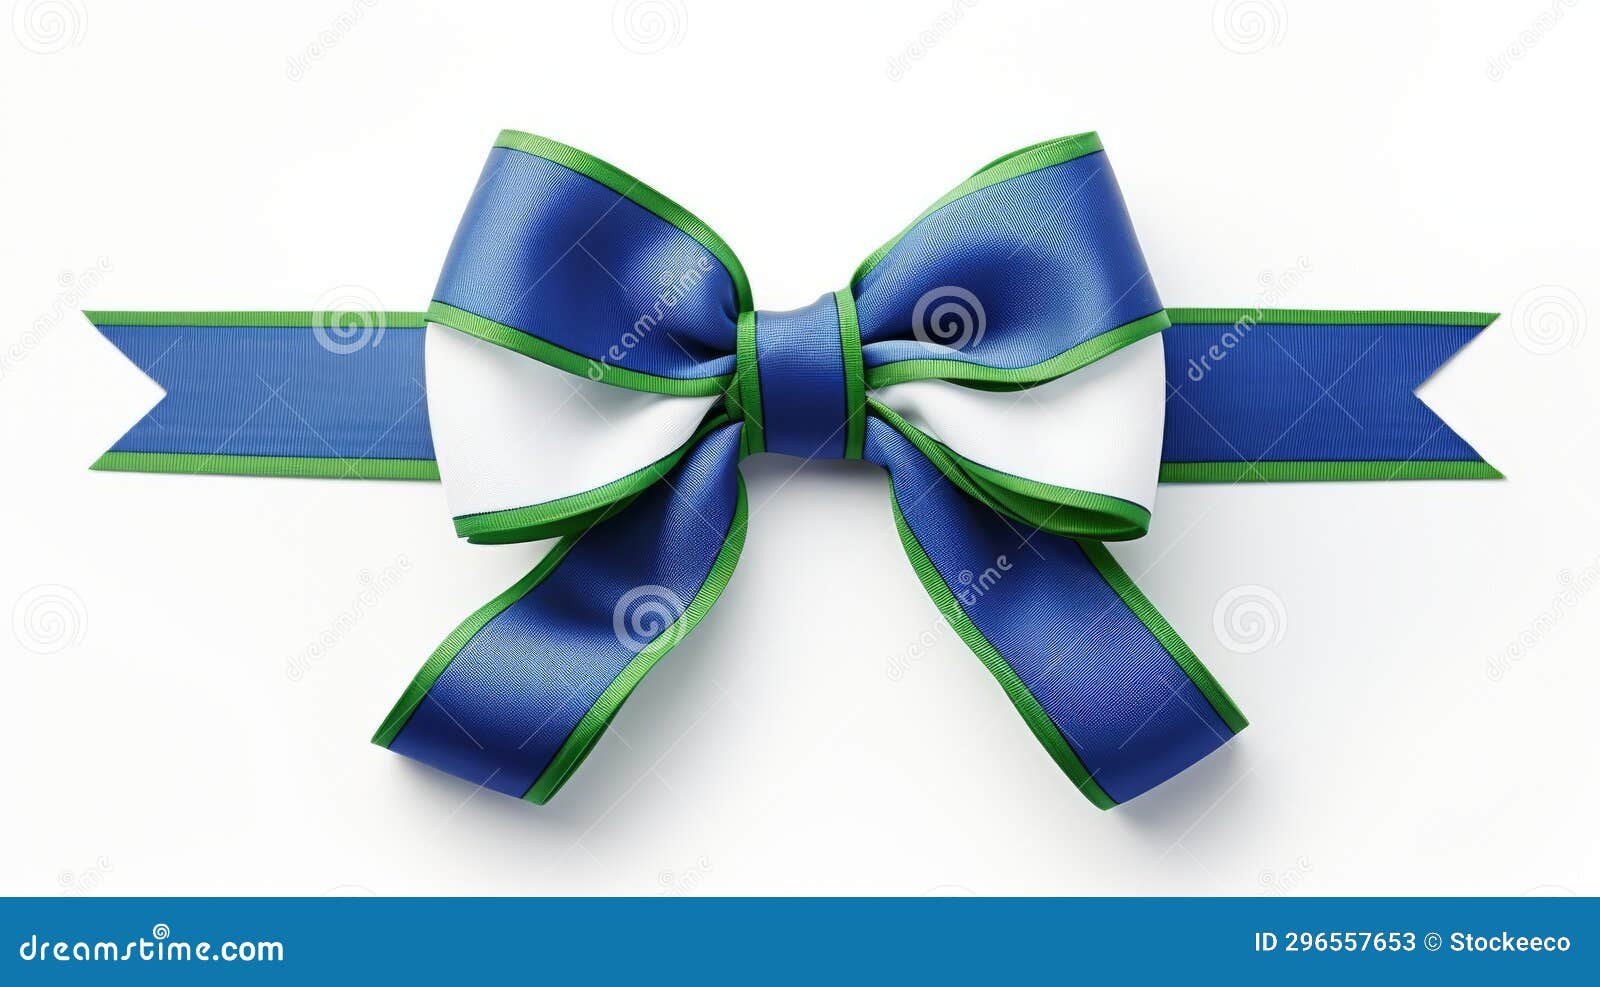 st. patrick's day pottery paper gift with blue bow